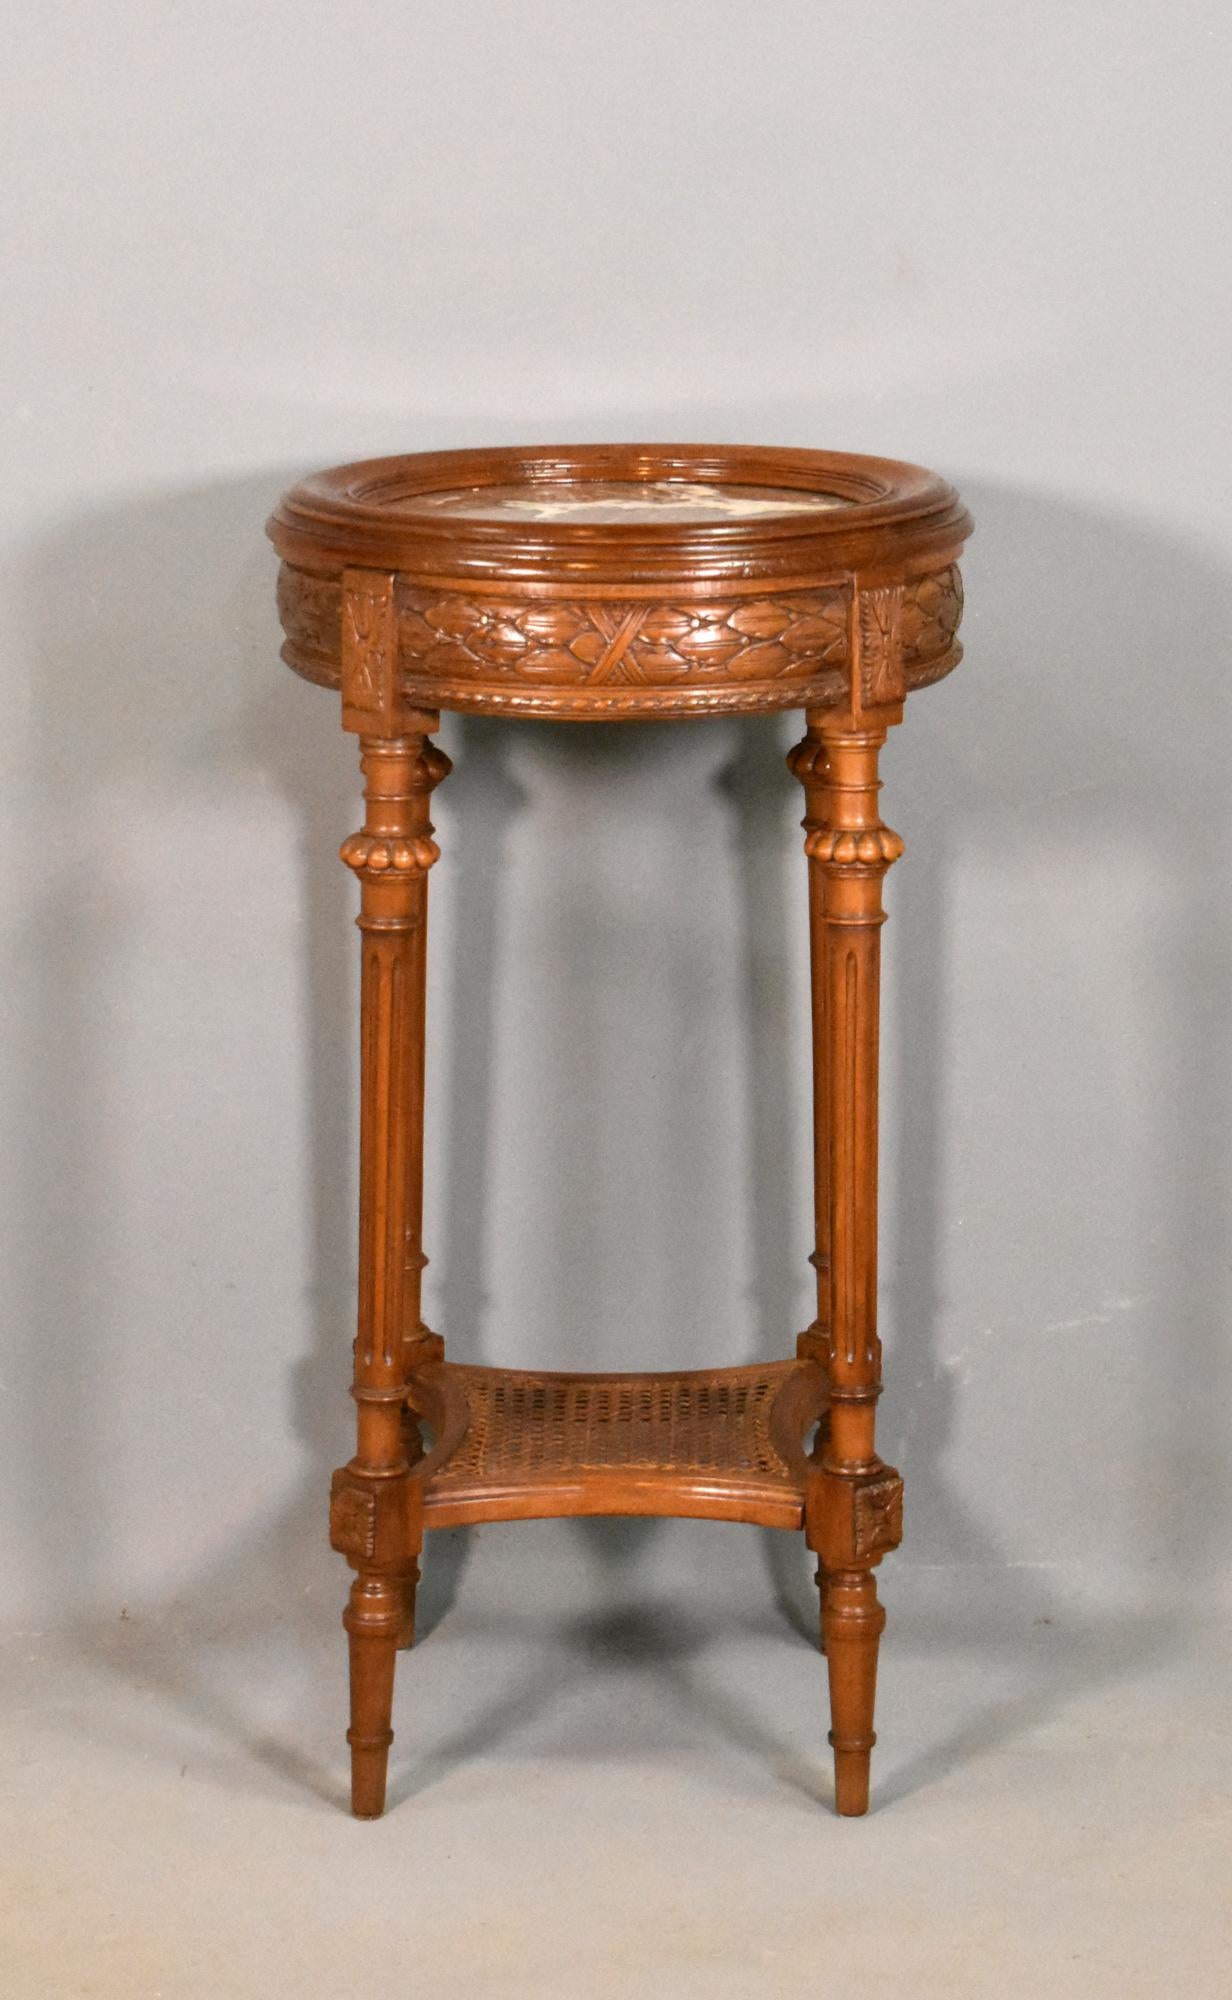 Walnut Gueridon Side Table Directoire Period

A beautifully crafted walnut gueridon features a red, white and grey variegated marble set into a turned moulded frame. 

The frieze below depicts a laurel leaf band and rope moulding. 

The turned